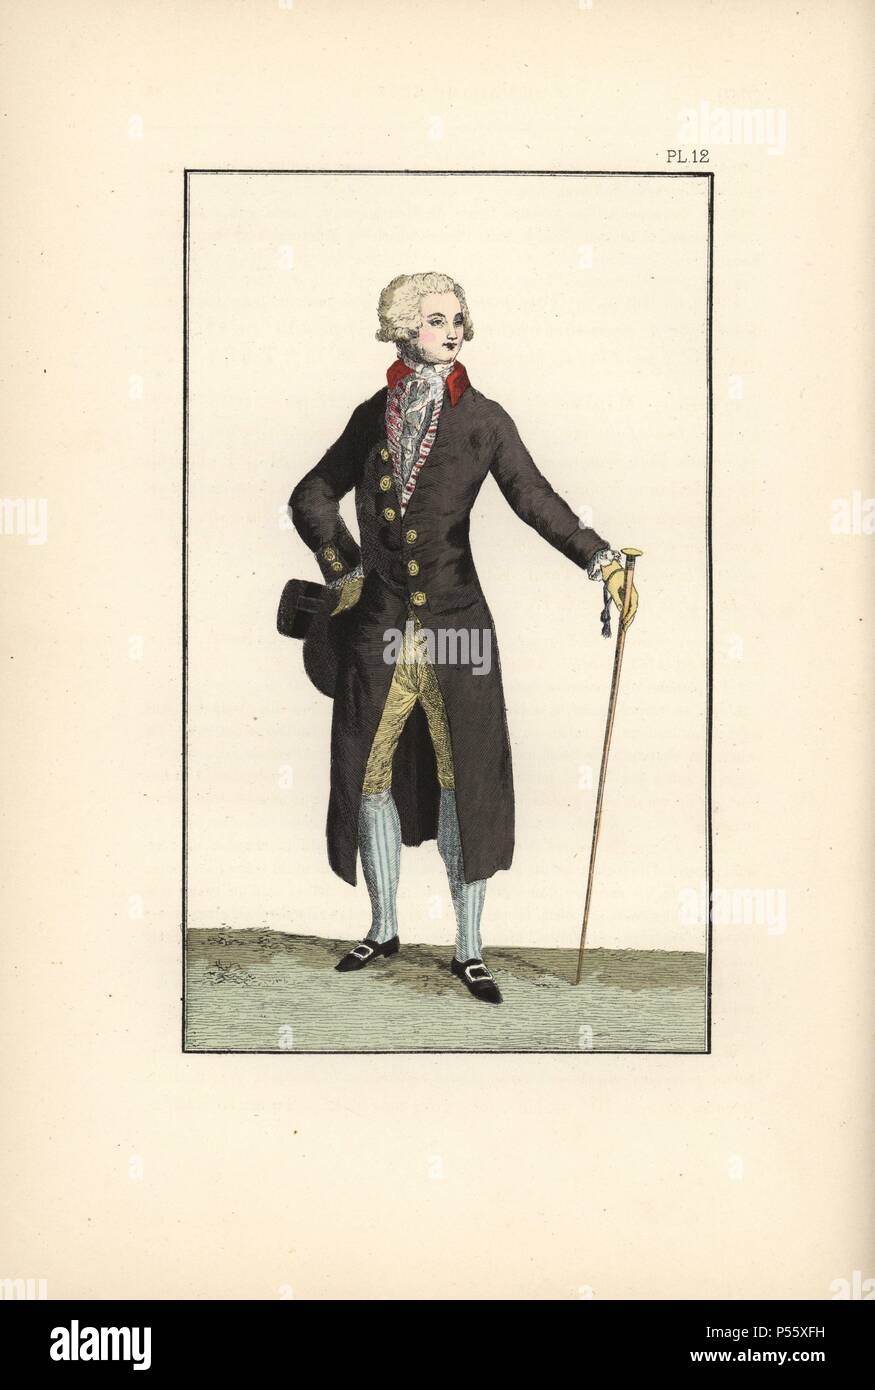 Man in wool redingote in the colour of London-chimney soot with sailor sleeves. Hand-colored lithograph from 'Fashions and Customs of Marie Antoinette and her Times,' by Le Comte de Reiset, Paris, 1885. The journal of Madame Eloffe, dressmaker and linen-merchant to the Queen and ladies of the court. Stock Photo